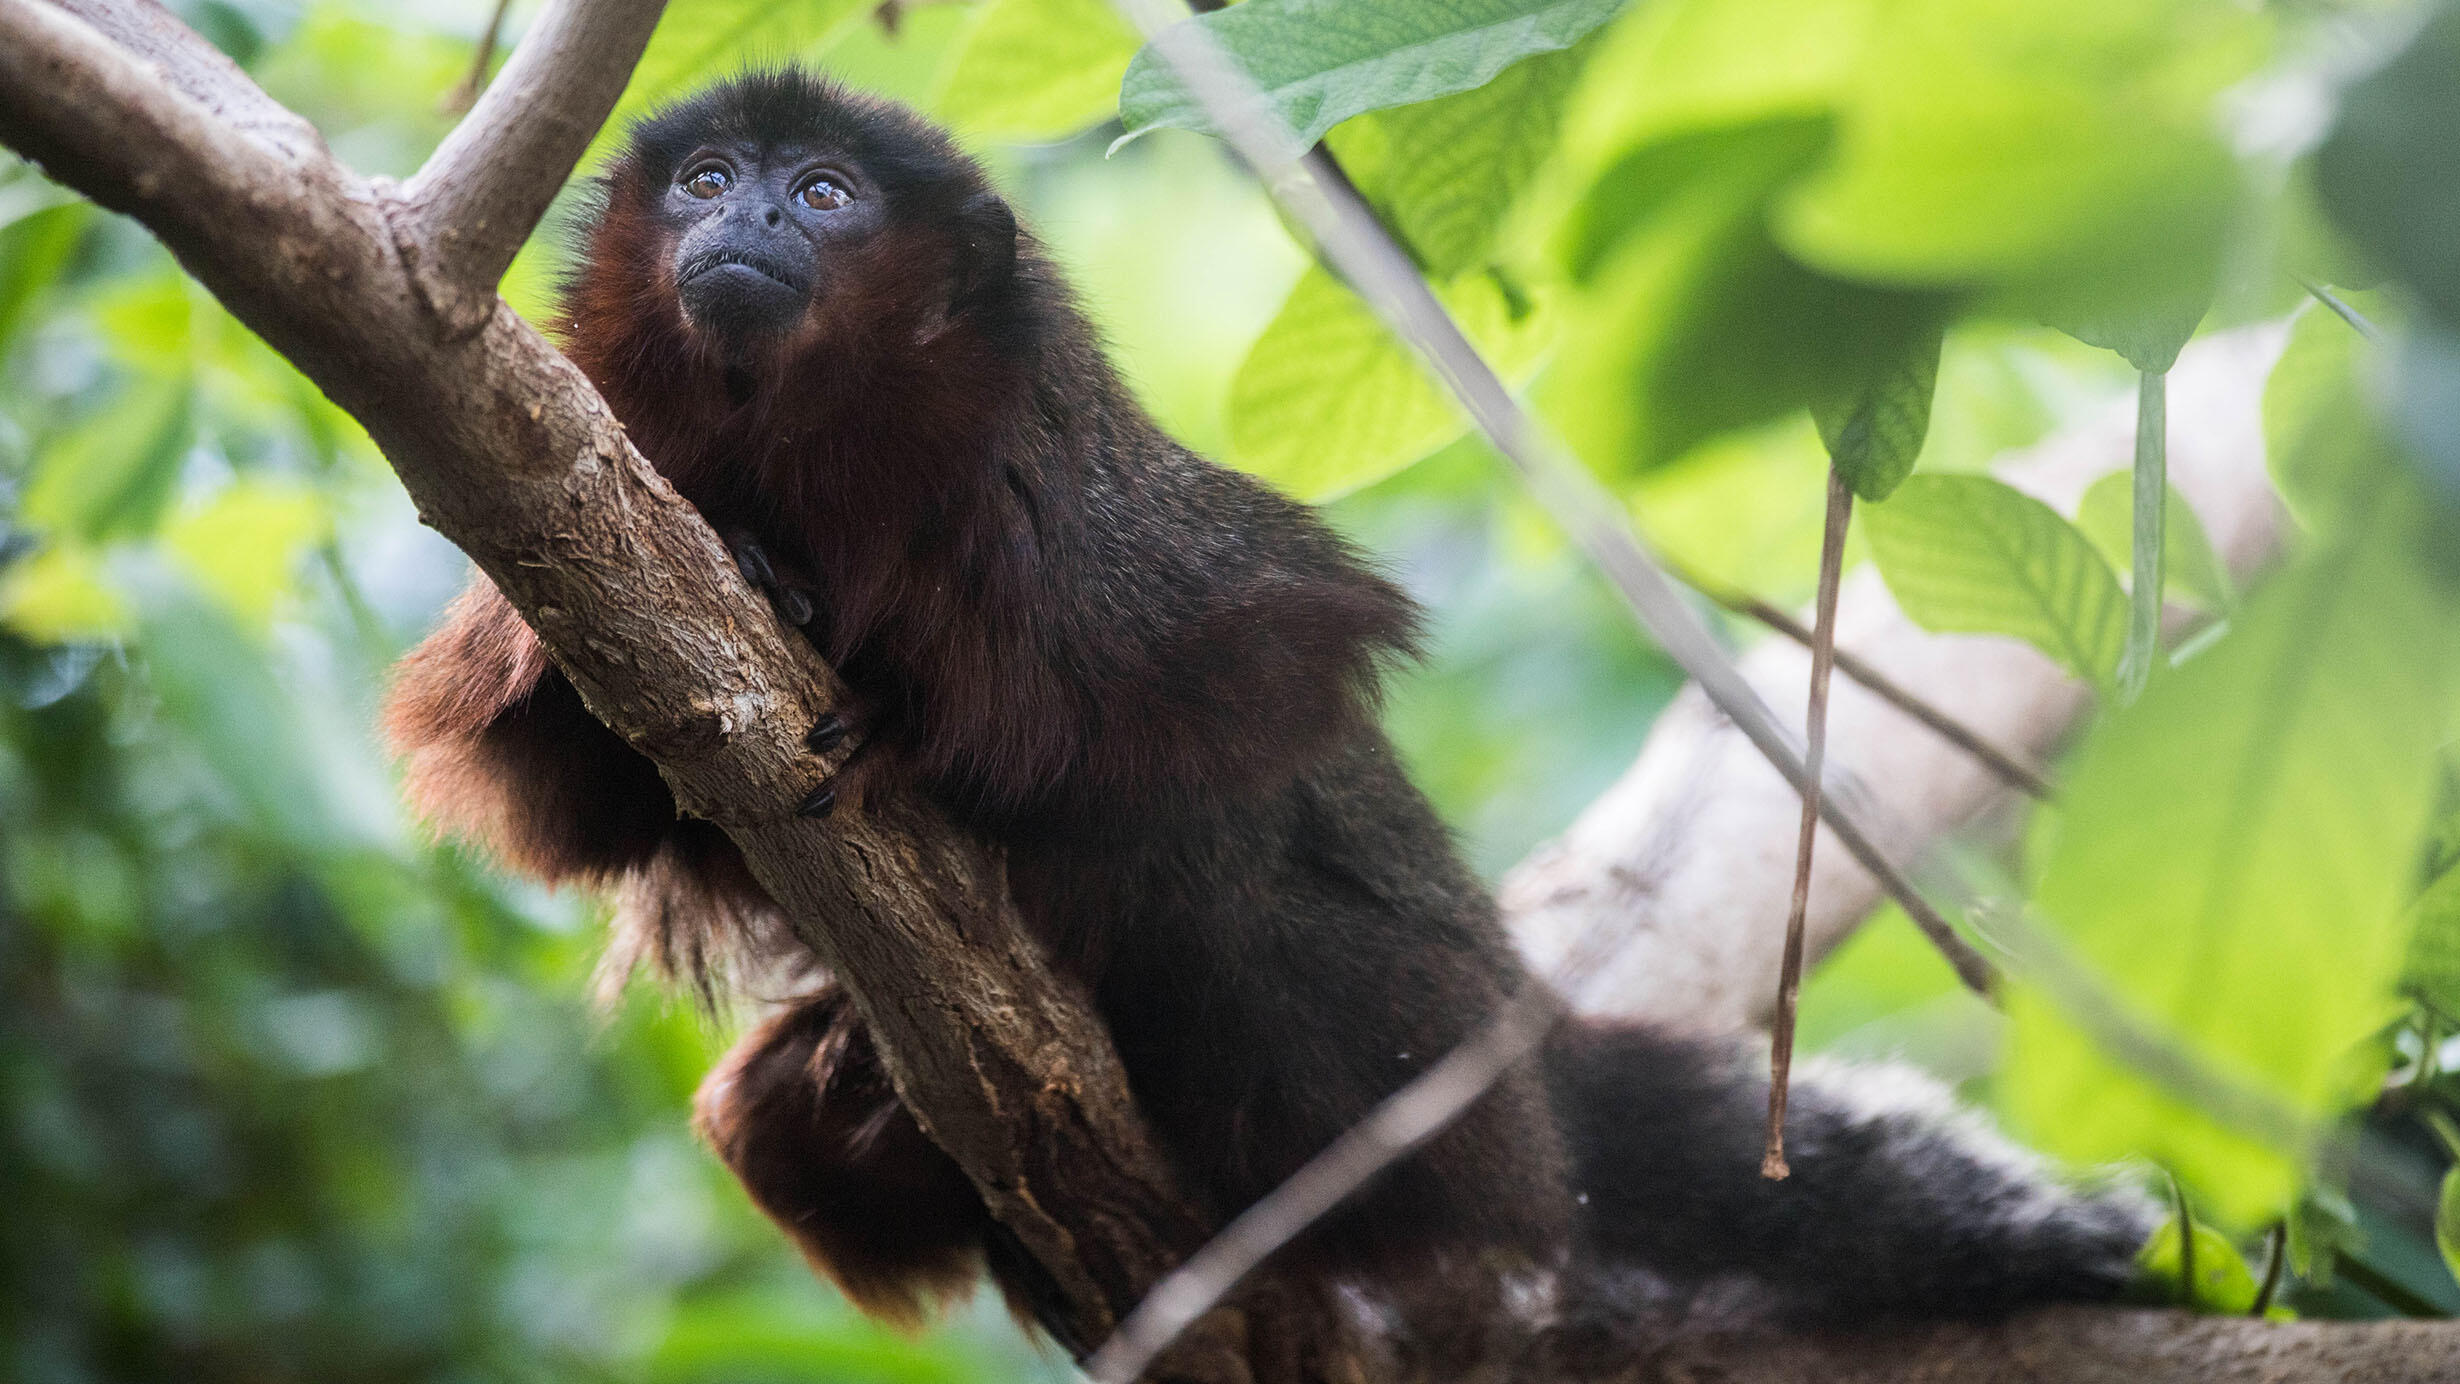 Red titi monkey perched on a branch.